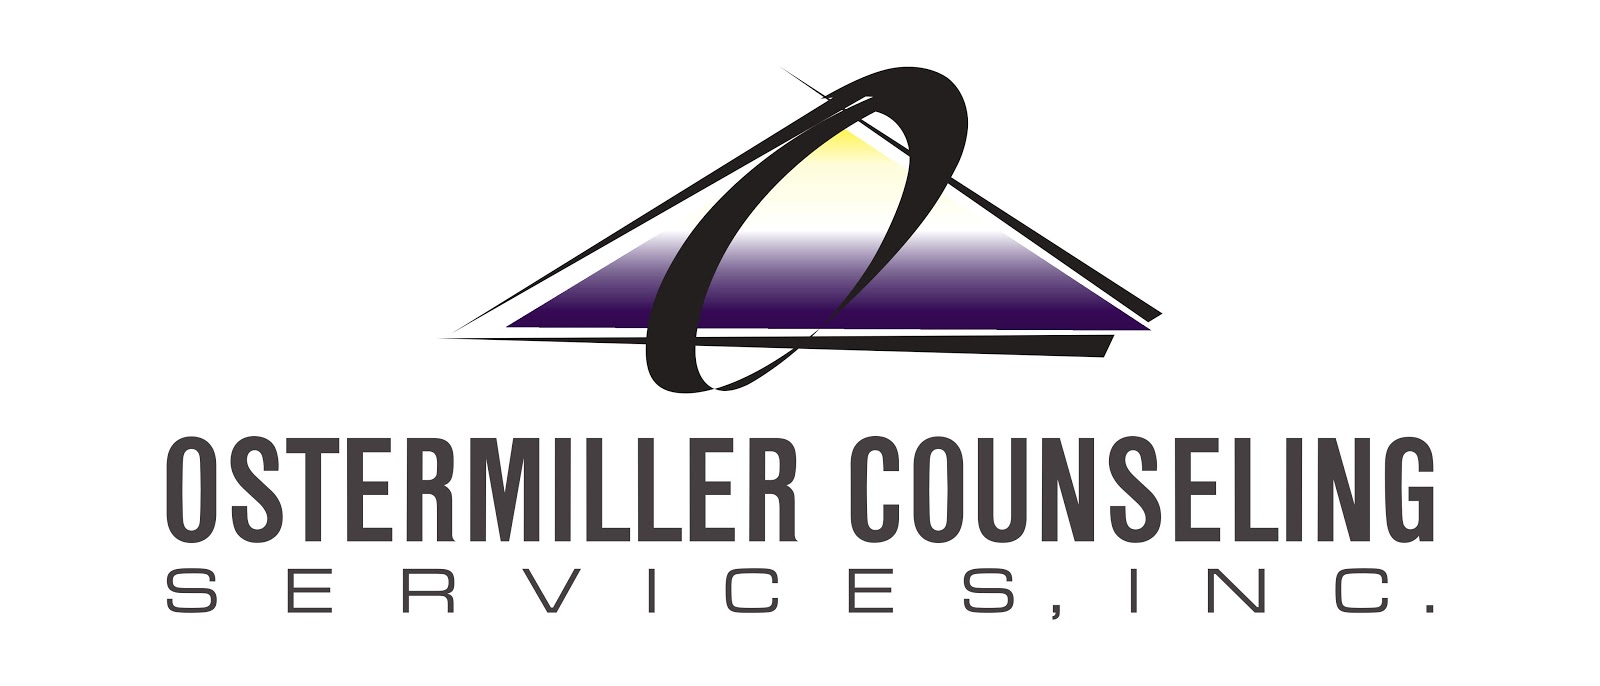 Ostermiller Counseling